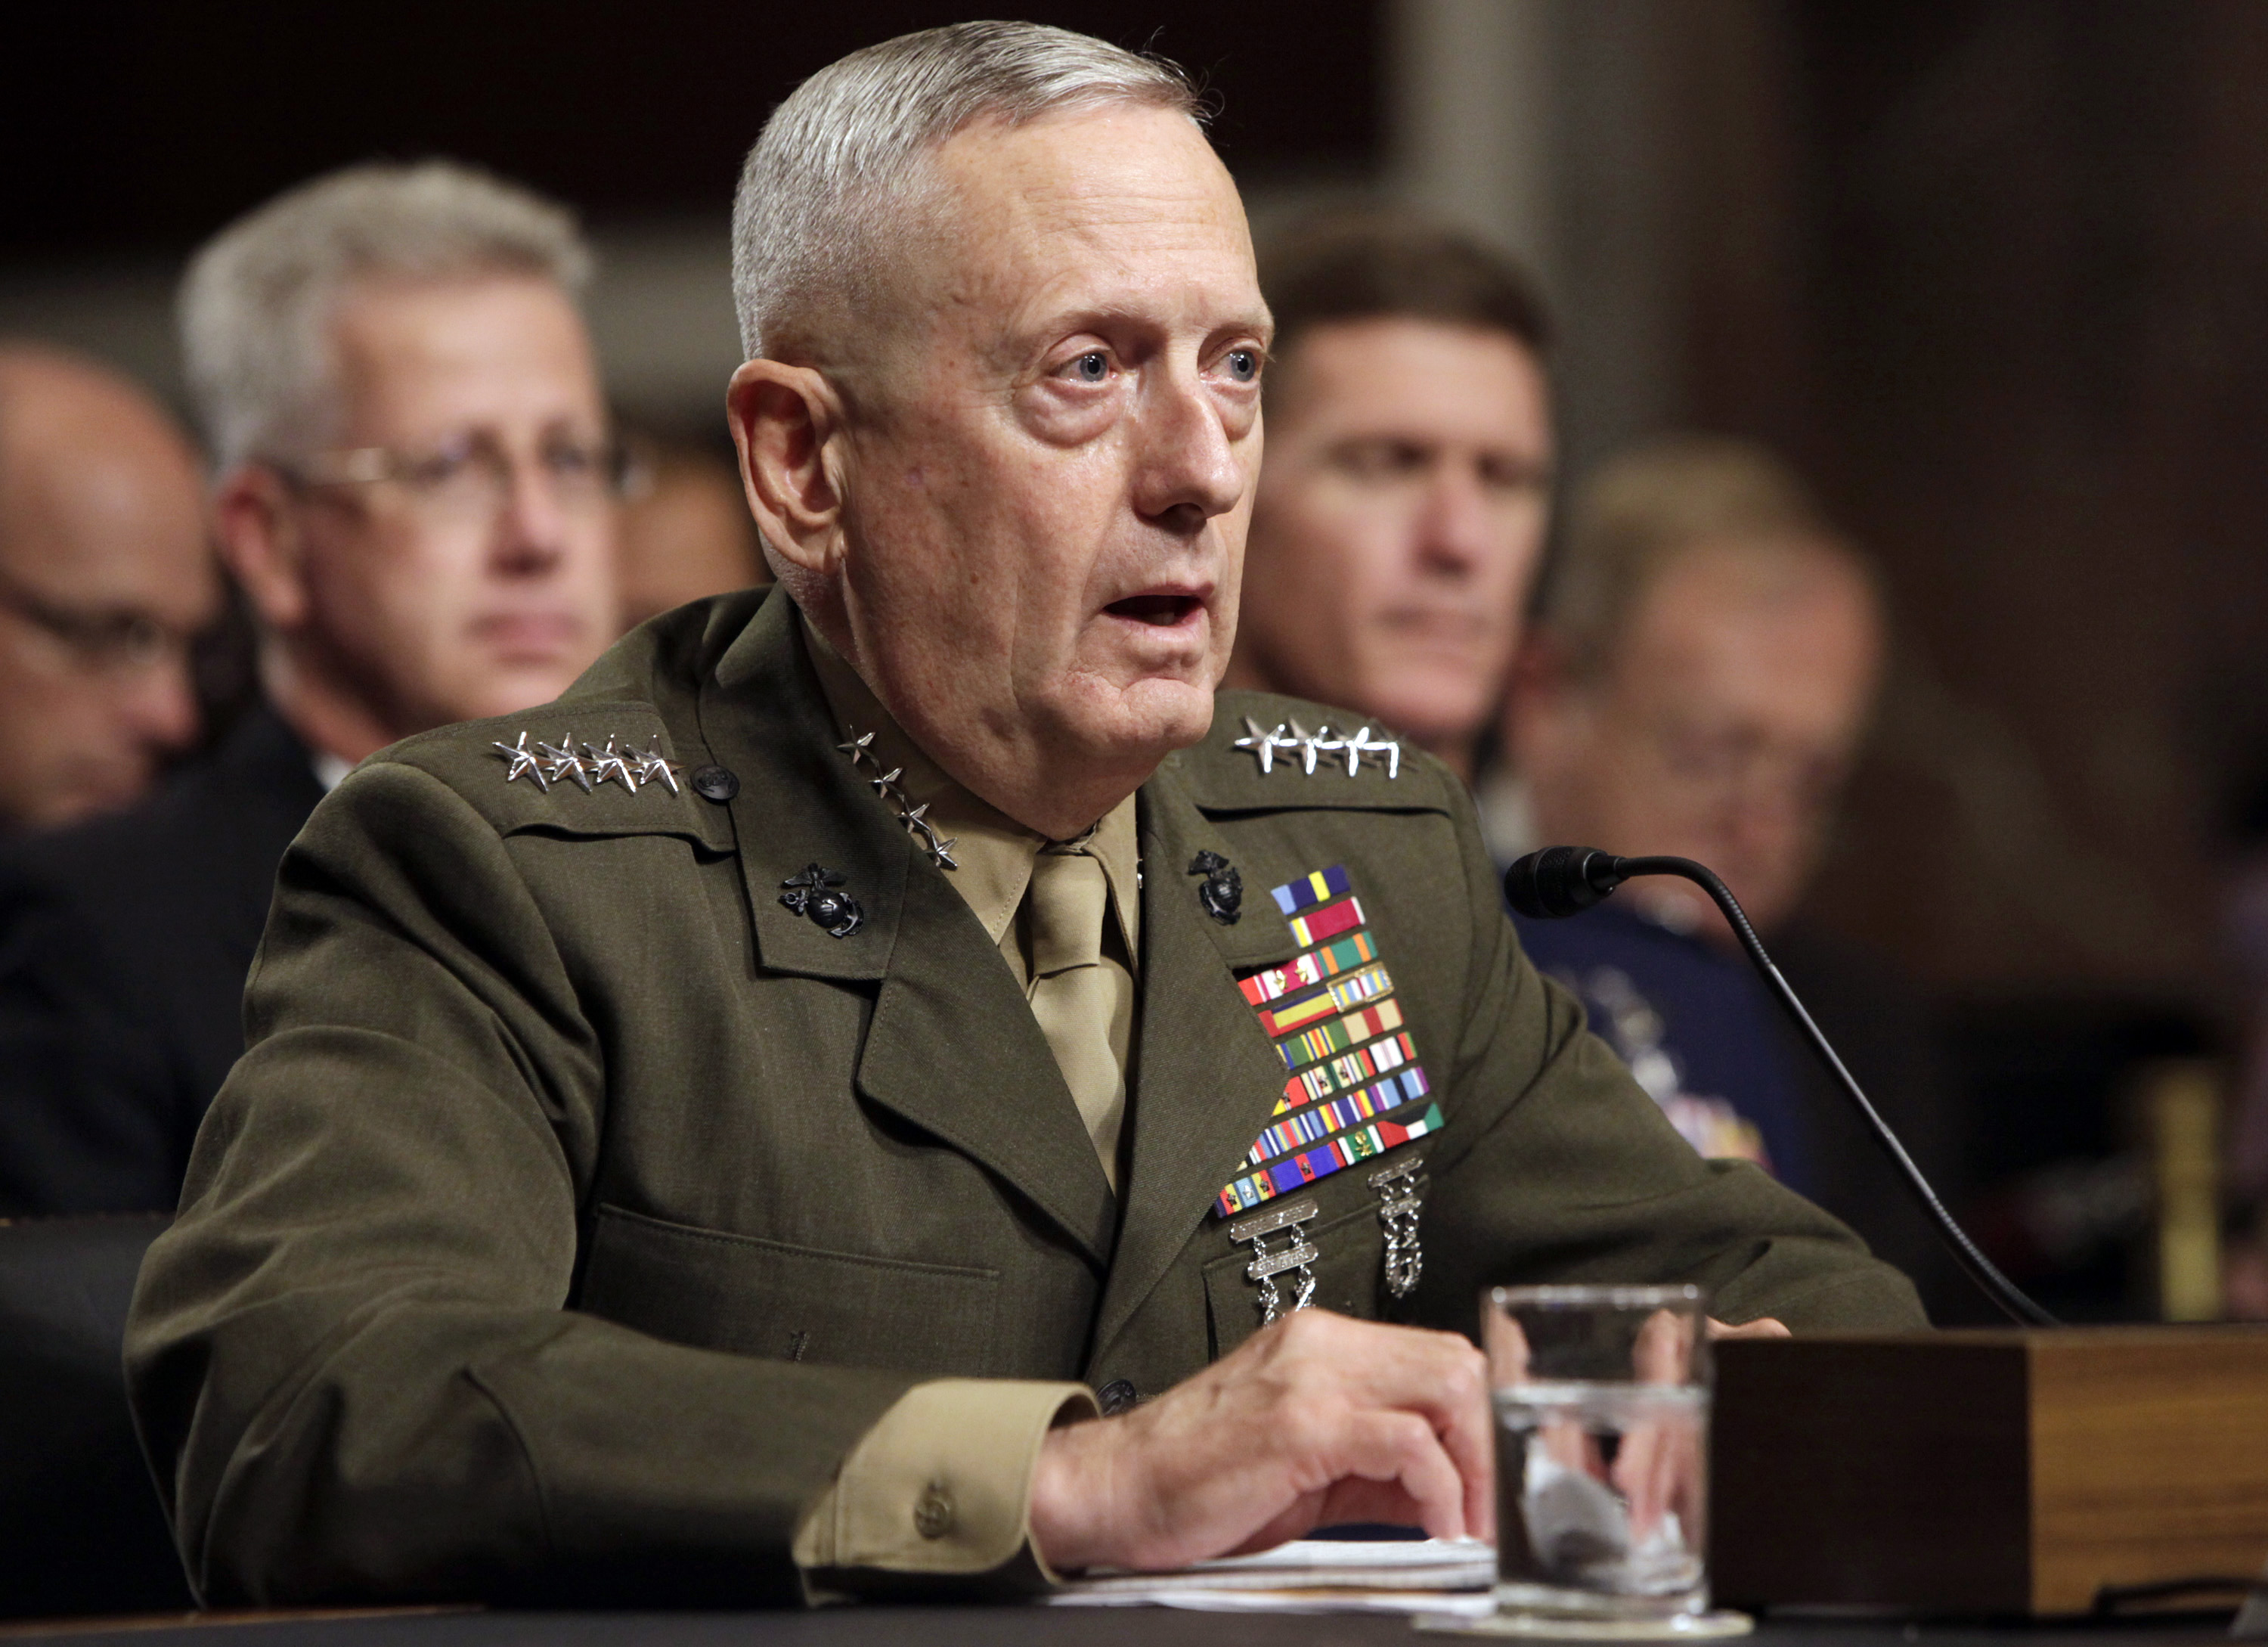 General James Mattis testifies before the Senate Armed Services Committee hearing on Capitol Hill in Washington July 27, 2010, on his nomination to be Commander of U.S. Central Command. REUTERS/Yuri Gripas